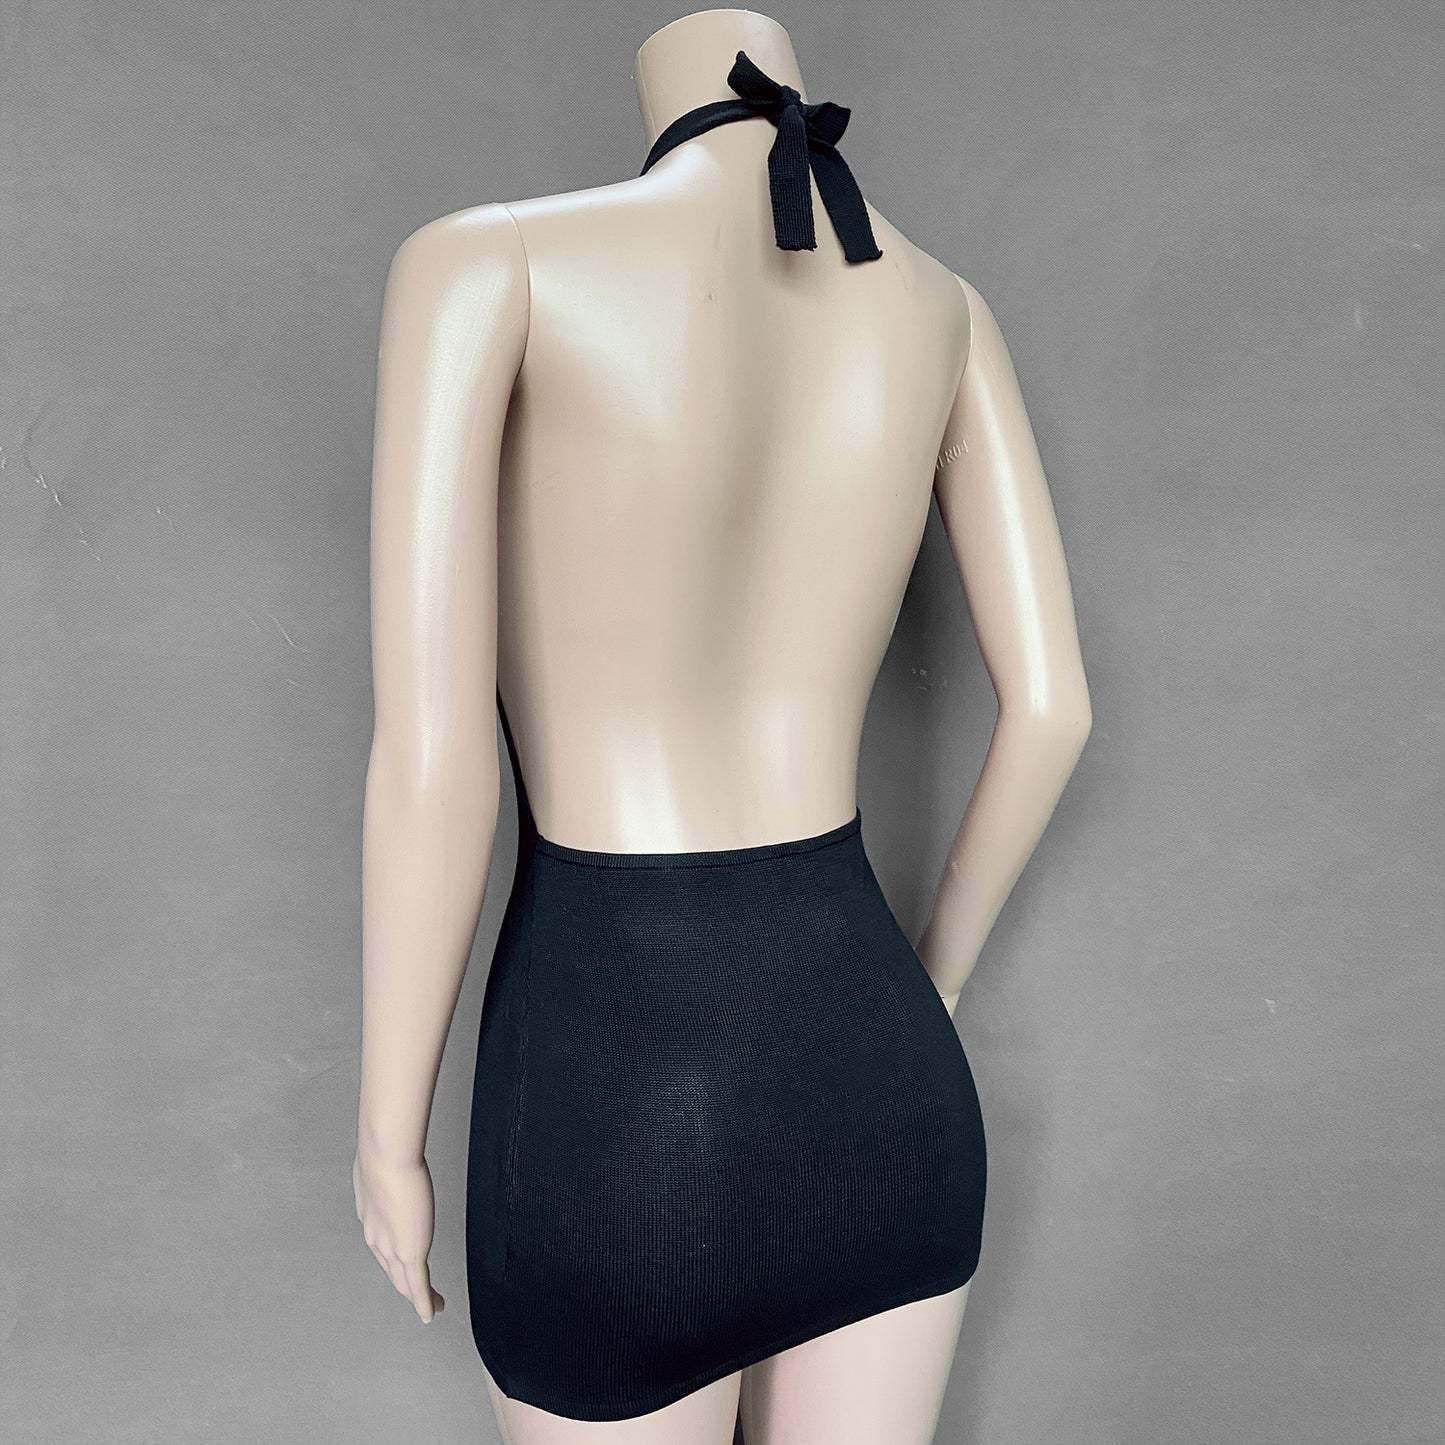 Cryptographic Halter Sexy Backless Mini Dresses Bodycon Skinny